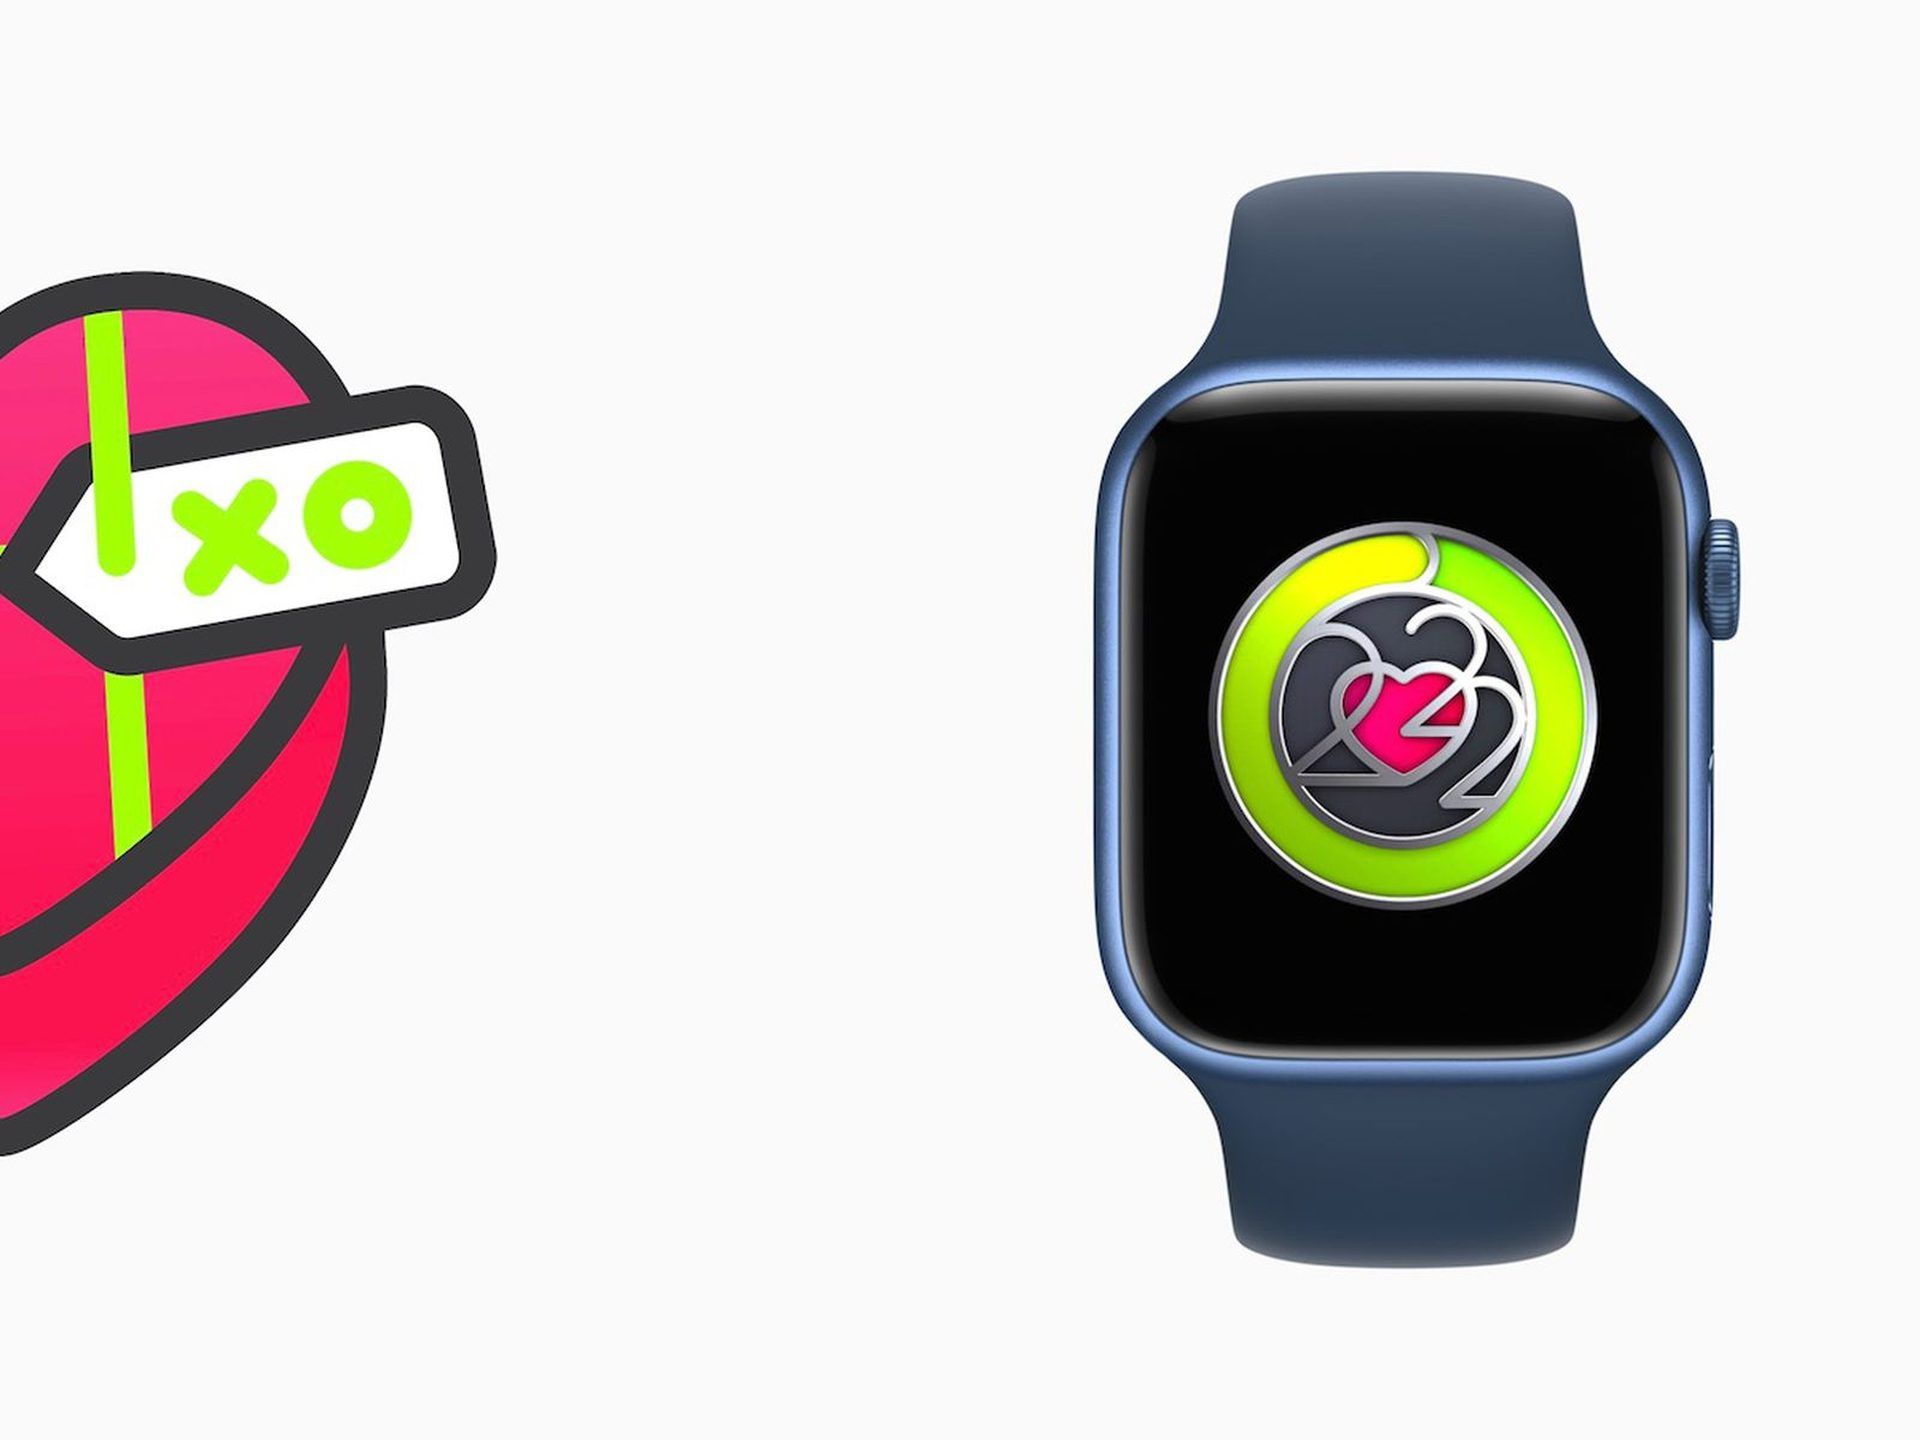 Apple Watch March Activity Challenge explained